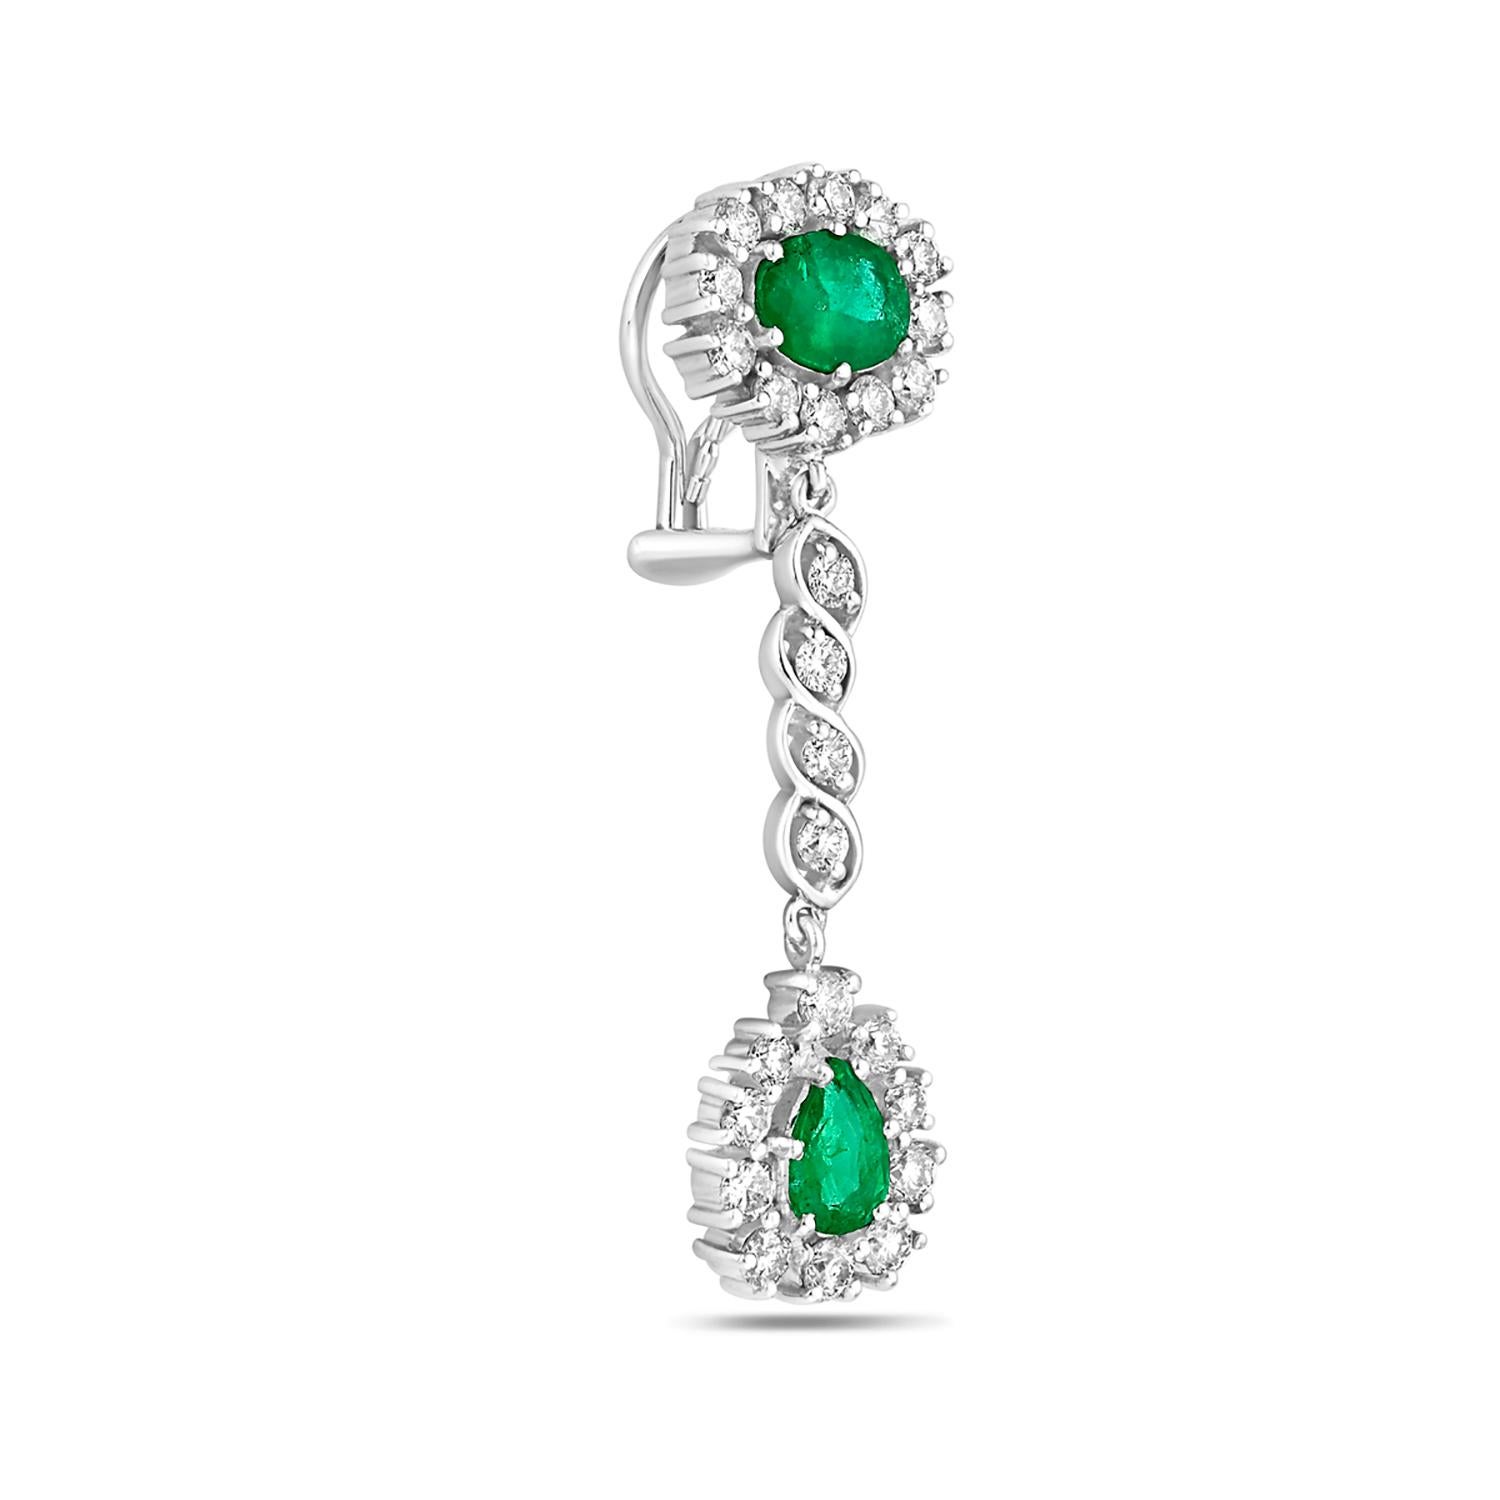 Contemporary Multi Shaped Emerald Earrings with Brilliant Cut Diamonds Made in 18k White Gold For Sale